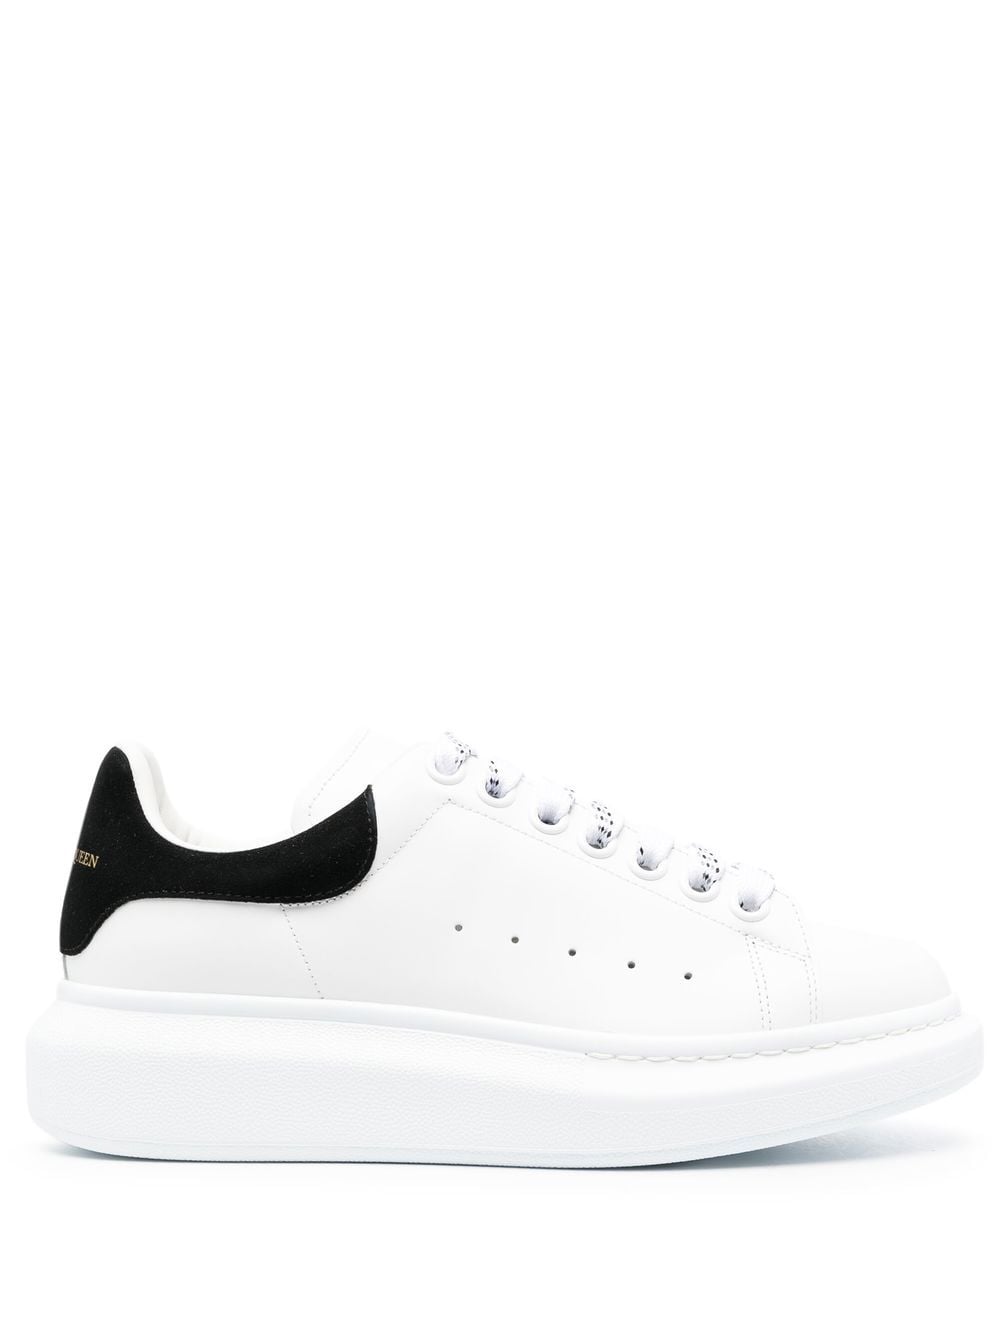 ALEXANDER MCQUEEN Contrasting Suede Women's Sneakers with Thick Sole